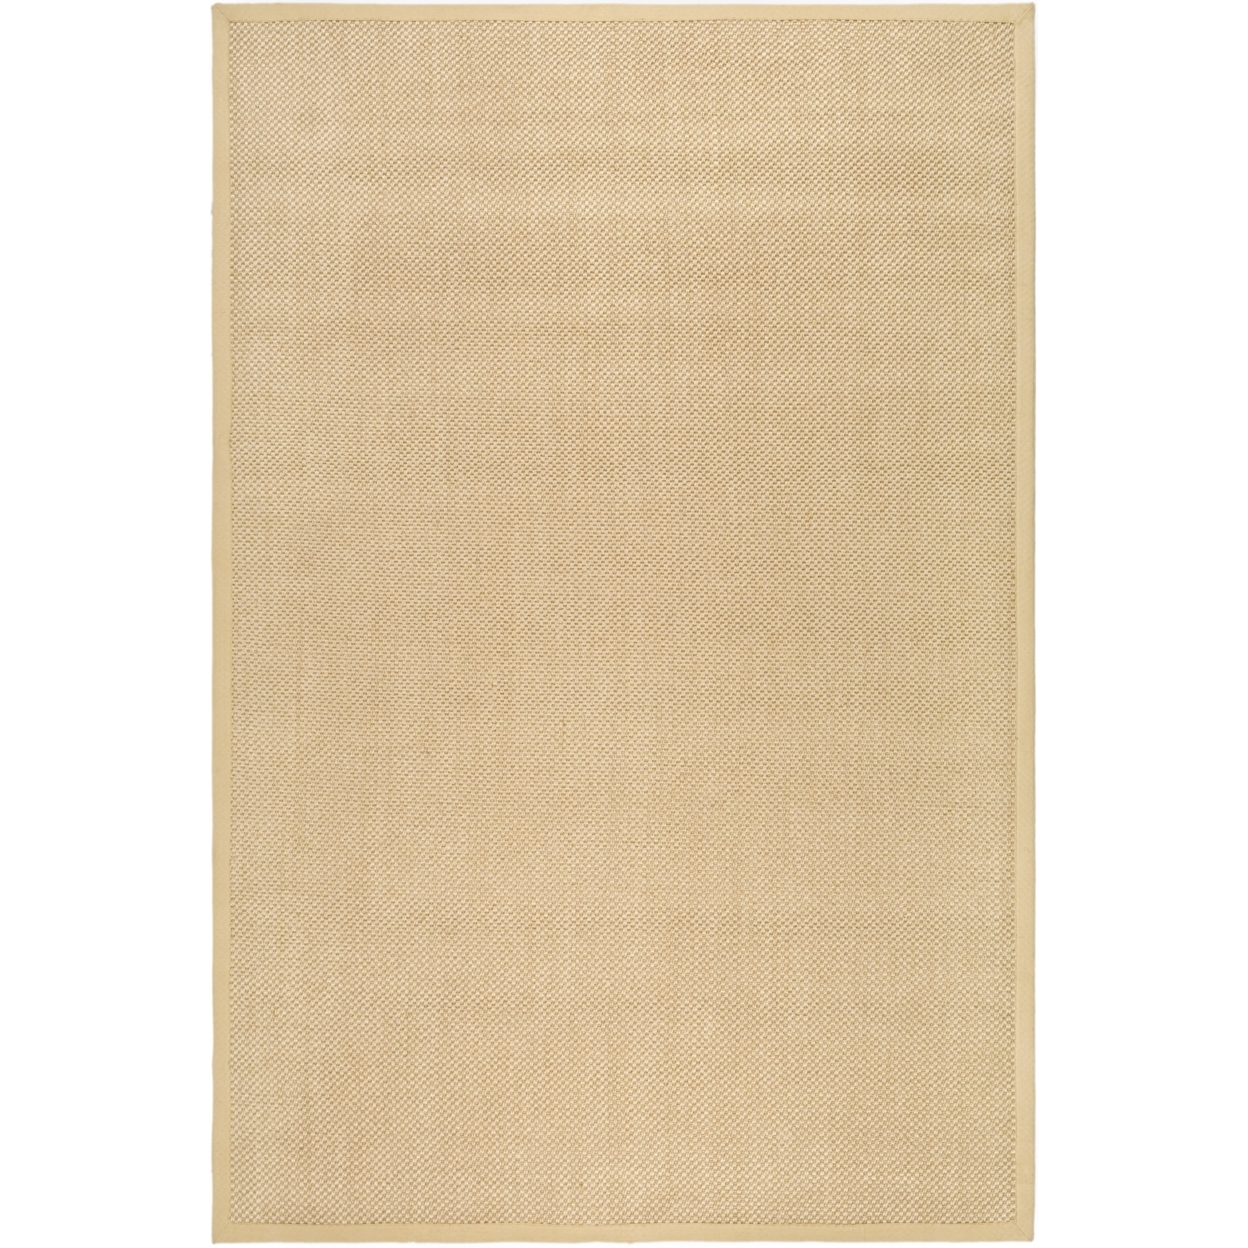 SAFAVIEH Natural Fiber Collection NF443A Maize/Wheat Rug - 6' X 9'